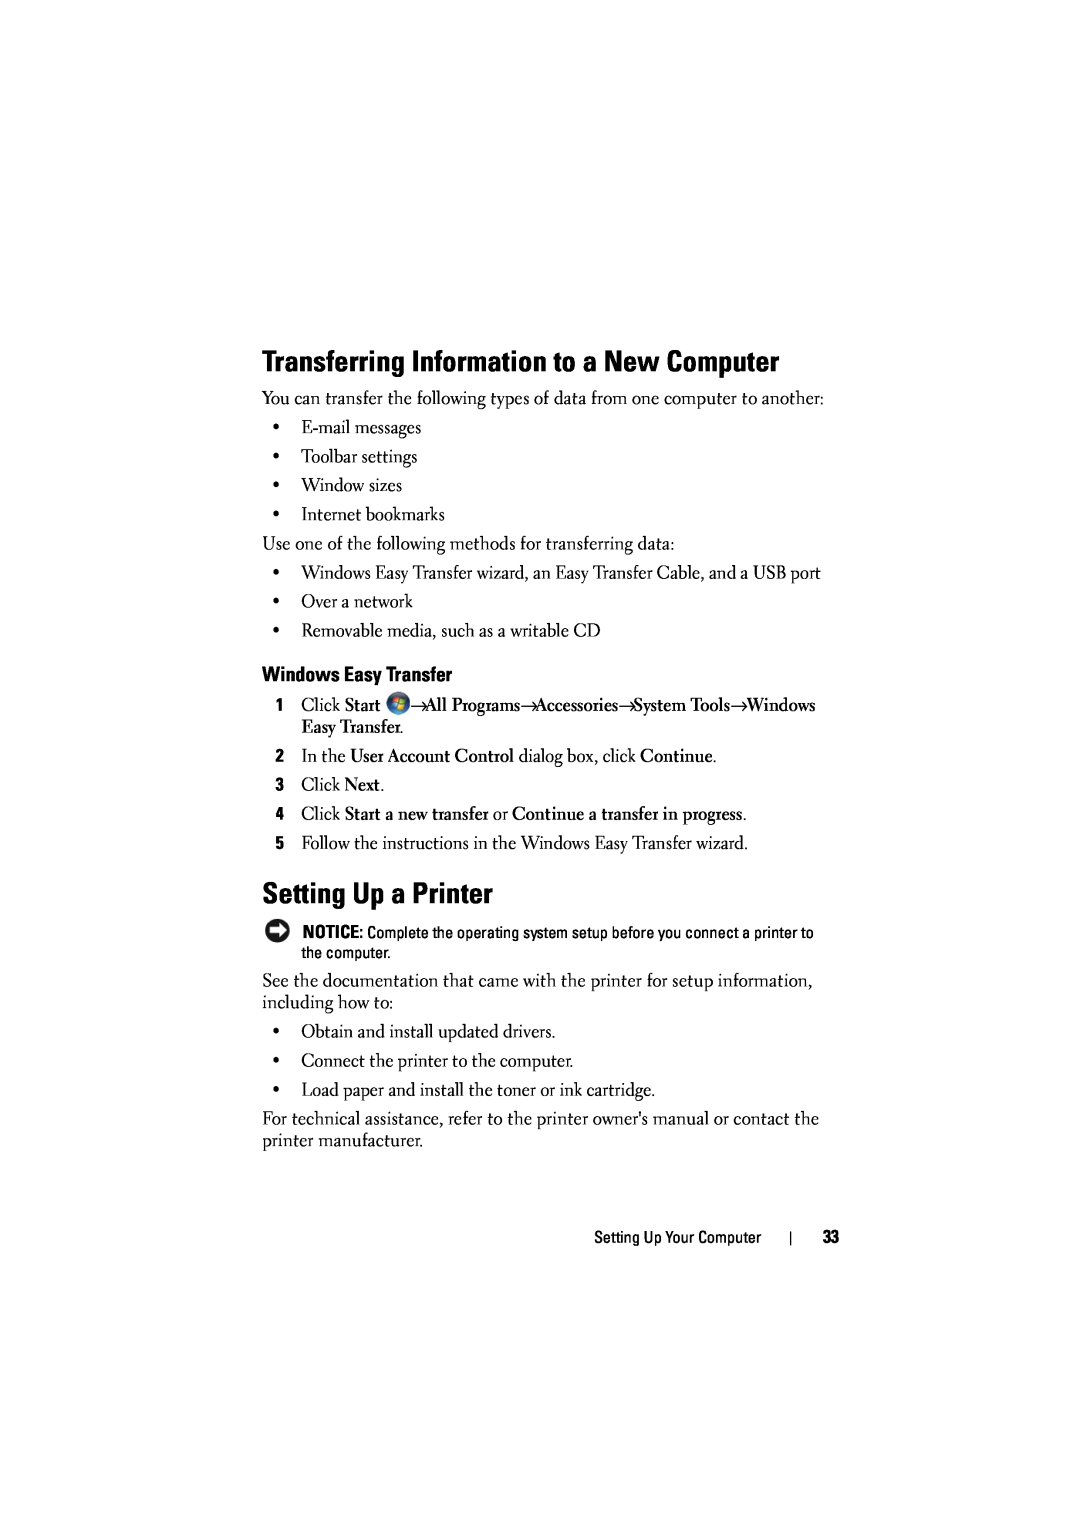 Dell 1526, 1525 owner manual Transferring Information to a New Computer, Setting Up a Printer, Windows Easy Transfer 